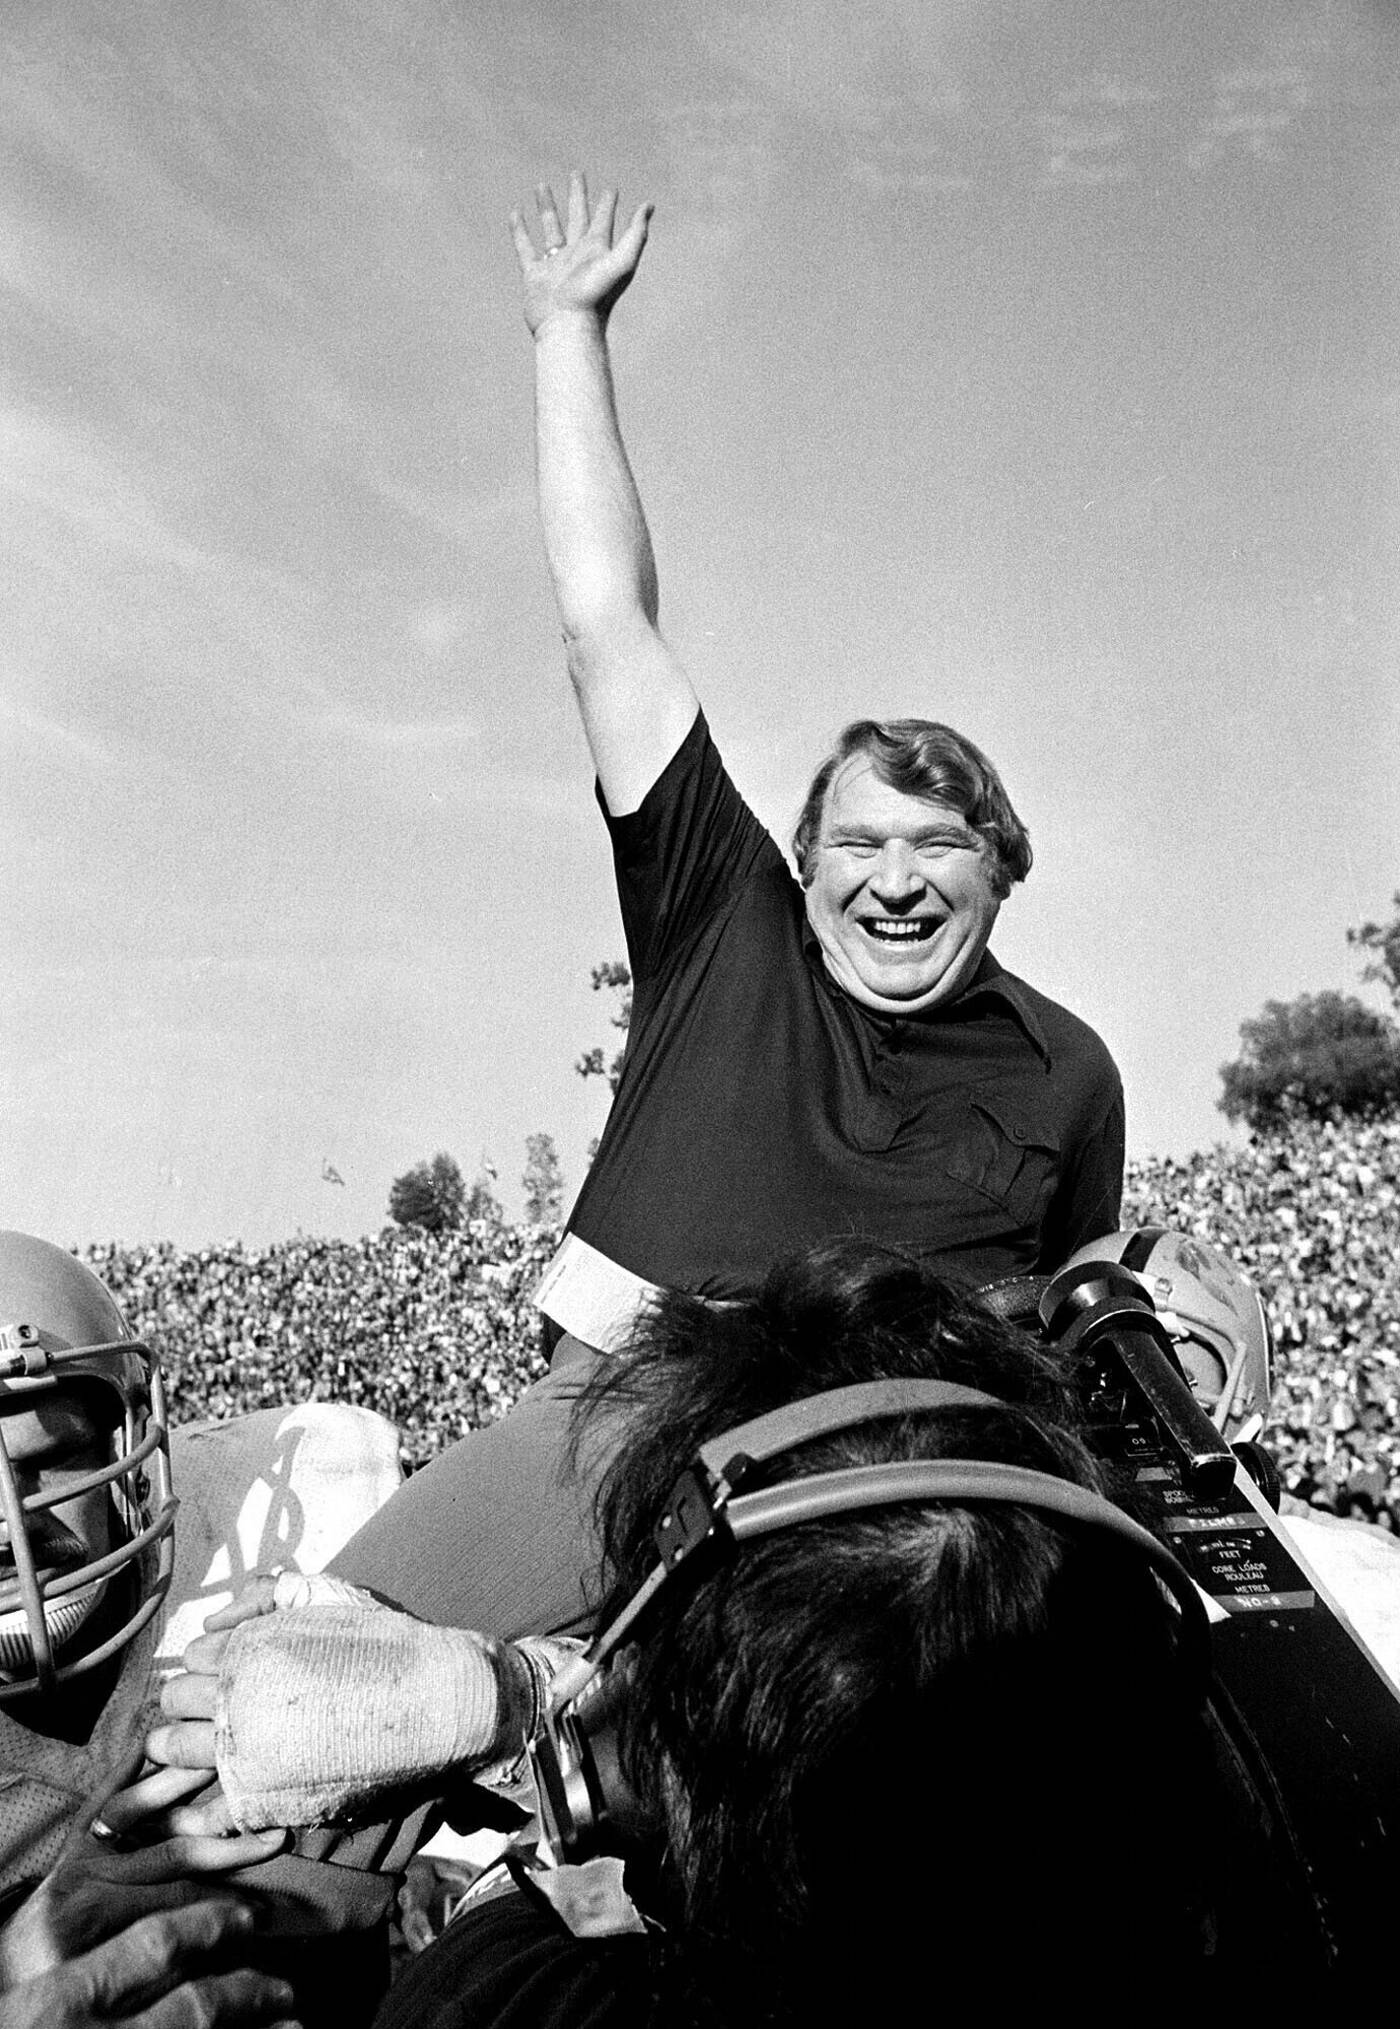 Coach John Madden of the Oakland Raiders is carried from the field by his players after his team defeated the Minnesota Vikings in Super Bowl XI in Pasadena, Calif., Jan. 9, 1977 John Madden, the Hall of Fame coach turned broadcaster whose exuberant calls combined with simple explanations provided a weekly soundtrack to NFL games for three decades, died Tuesday, the NFL announced. He was 85. (AP Photo/File)